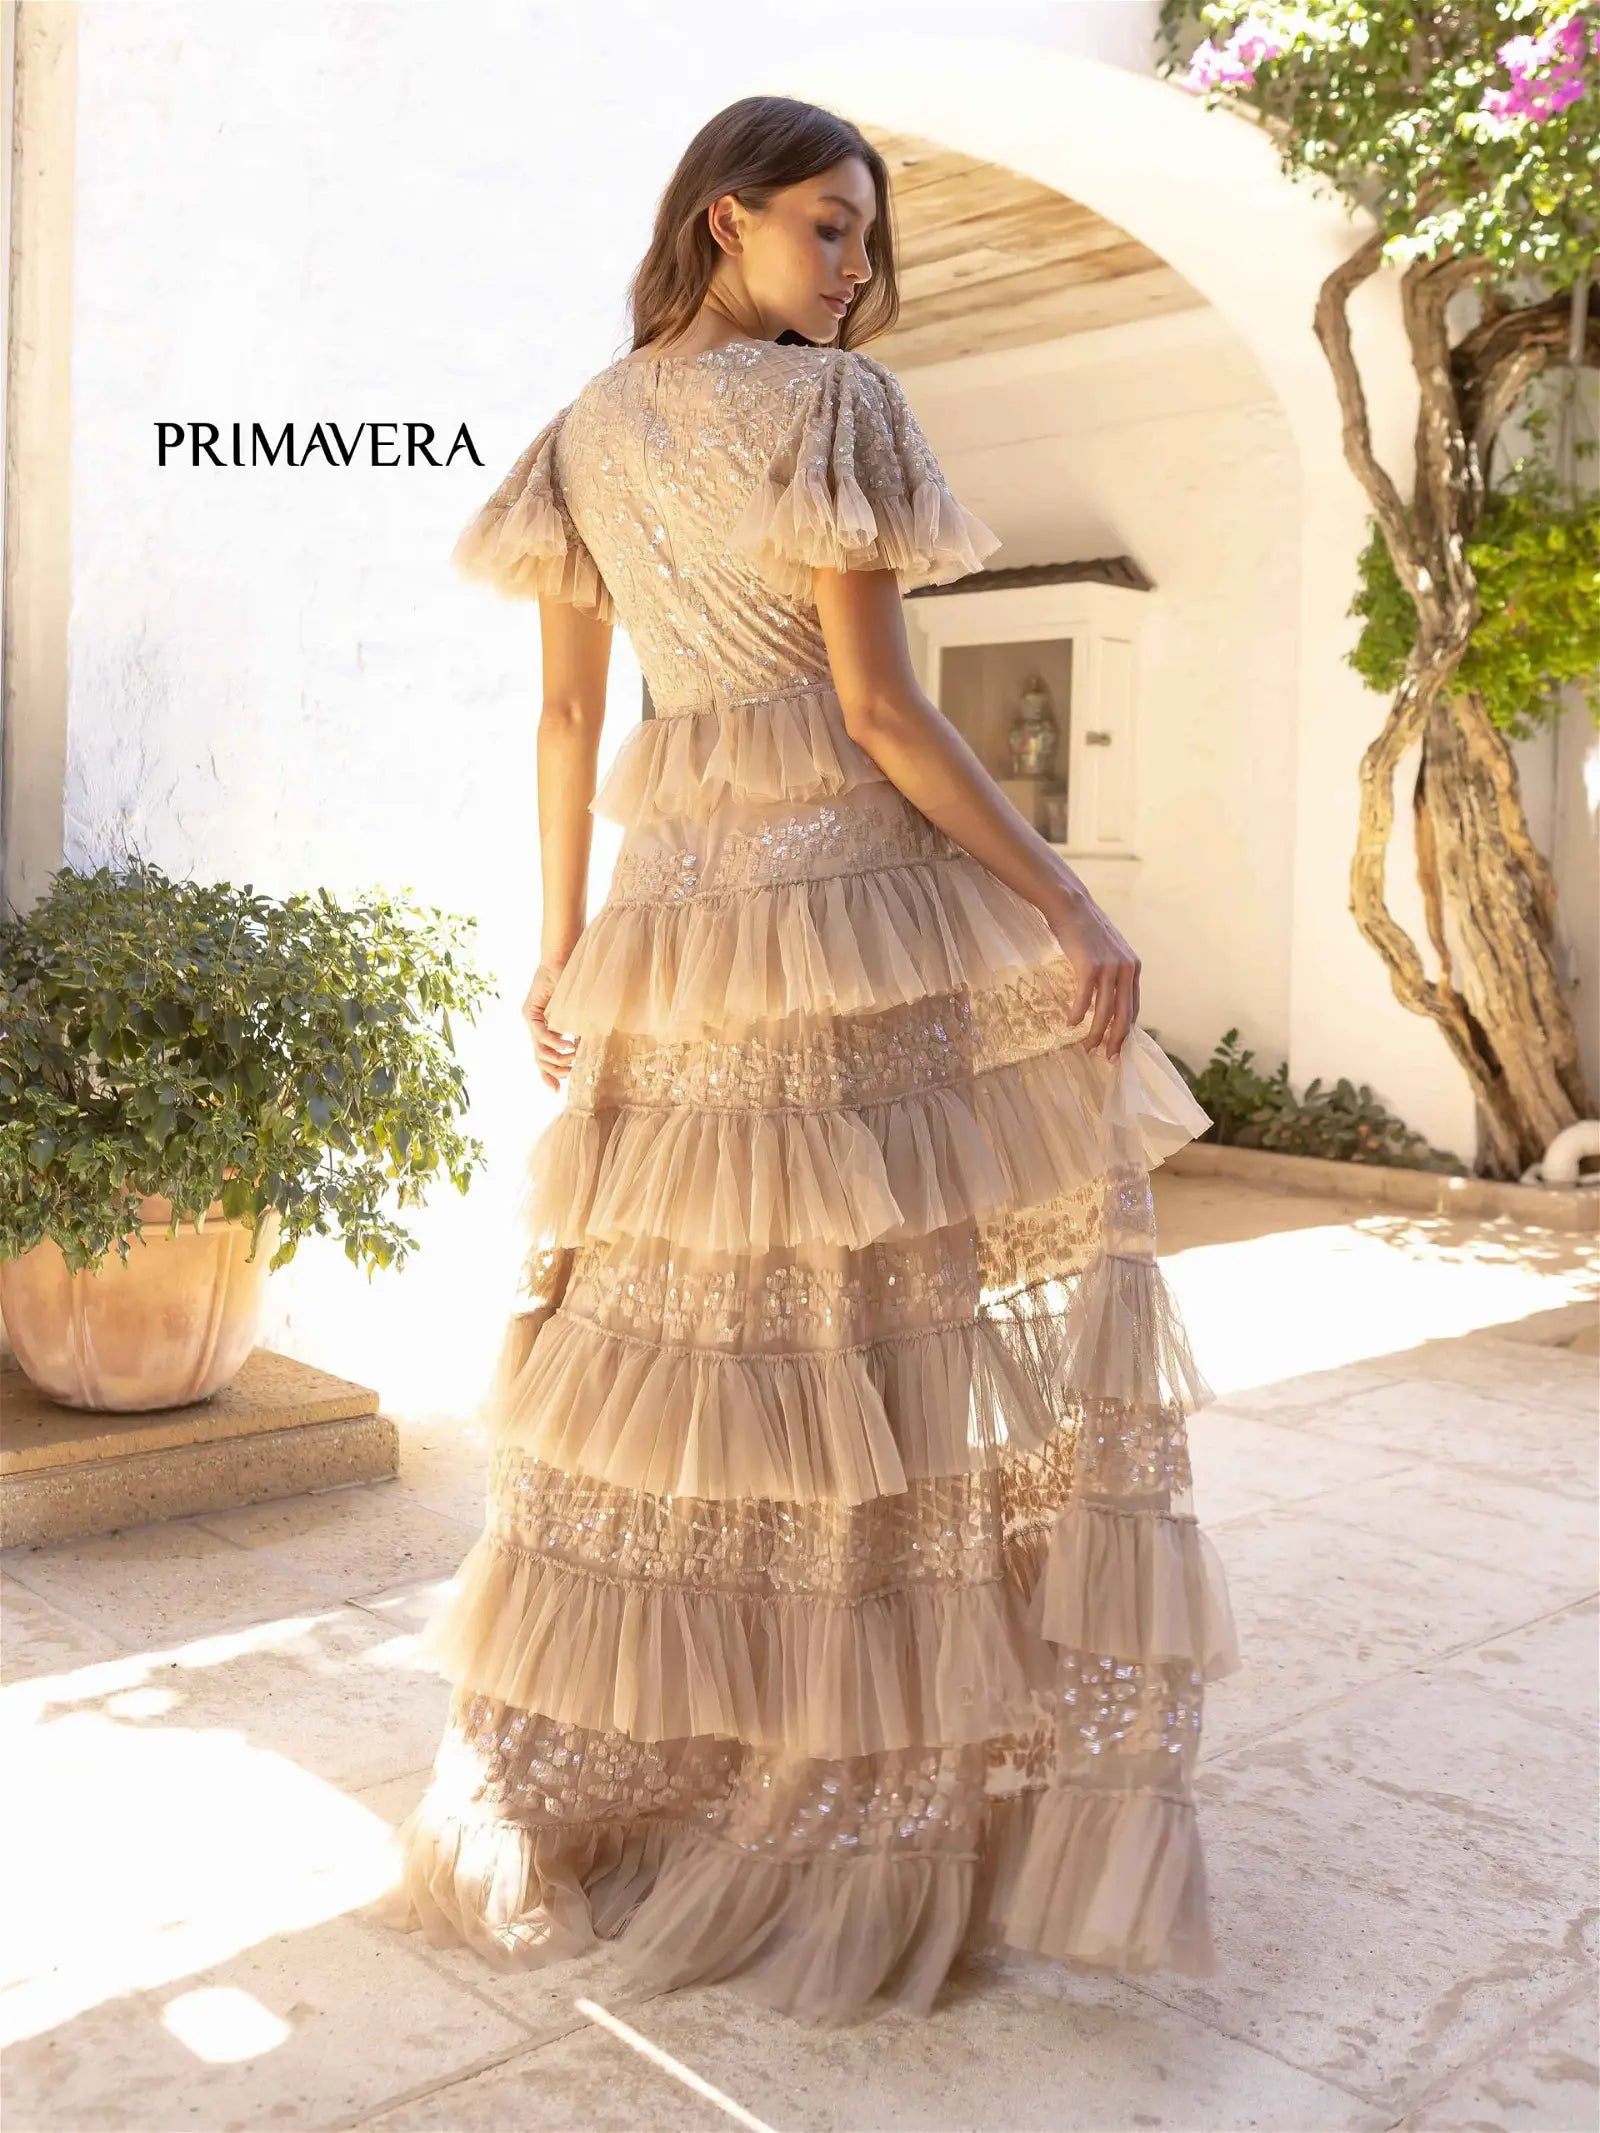 Primavera Couture 12058 Prom Dress Long Beaded gown. This gown has ruffles that go down the skirt. 